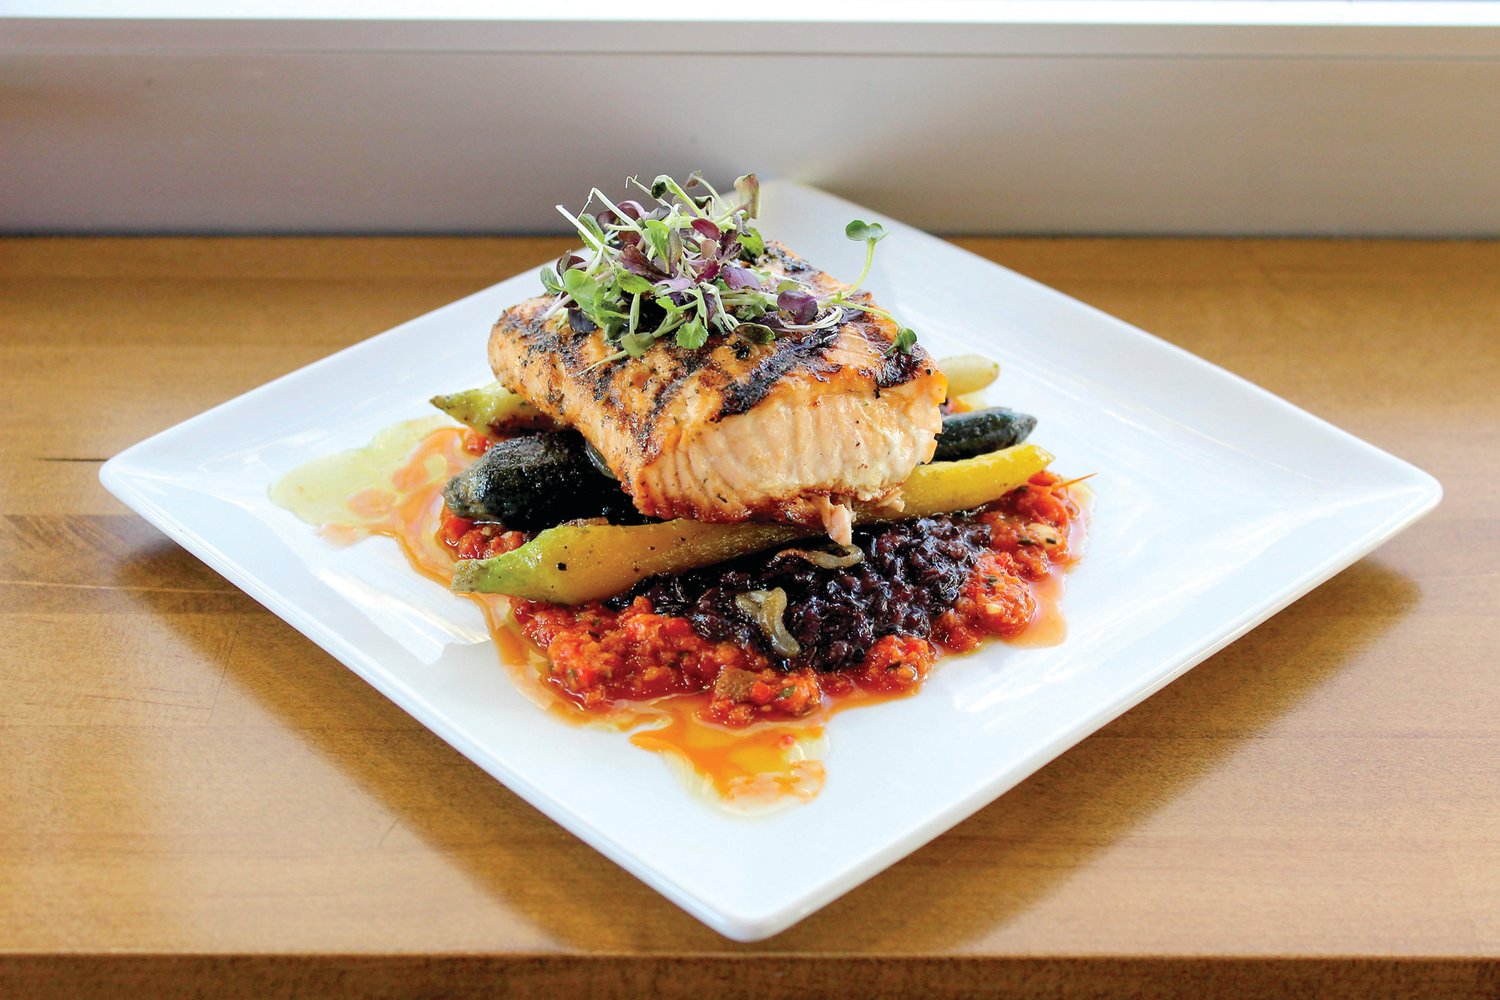 Salmon is a regular item on the menu at The Deck Restaurant and Bar in New Hope, located on the upper deck of the Bucks County Playhouse. Photograph courtesy of The Deck Restaurant and Bar